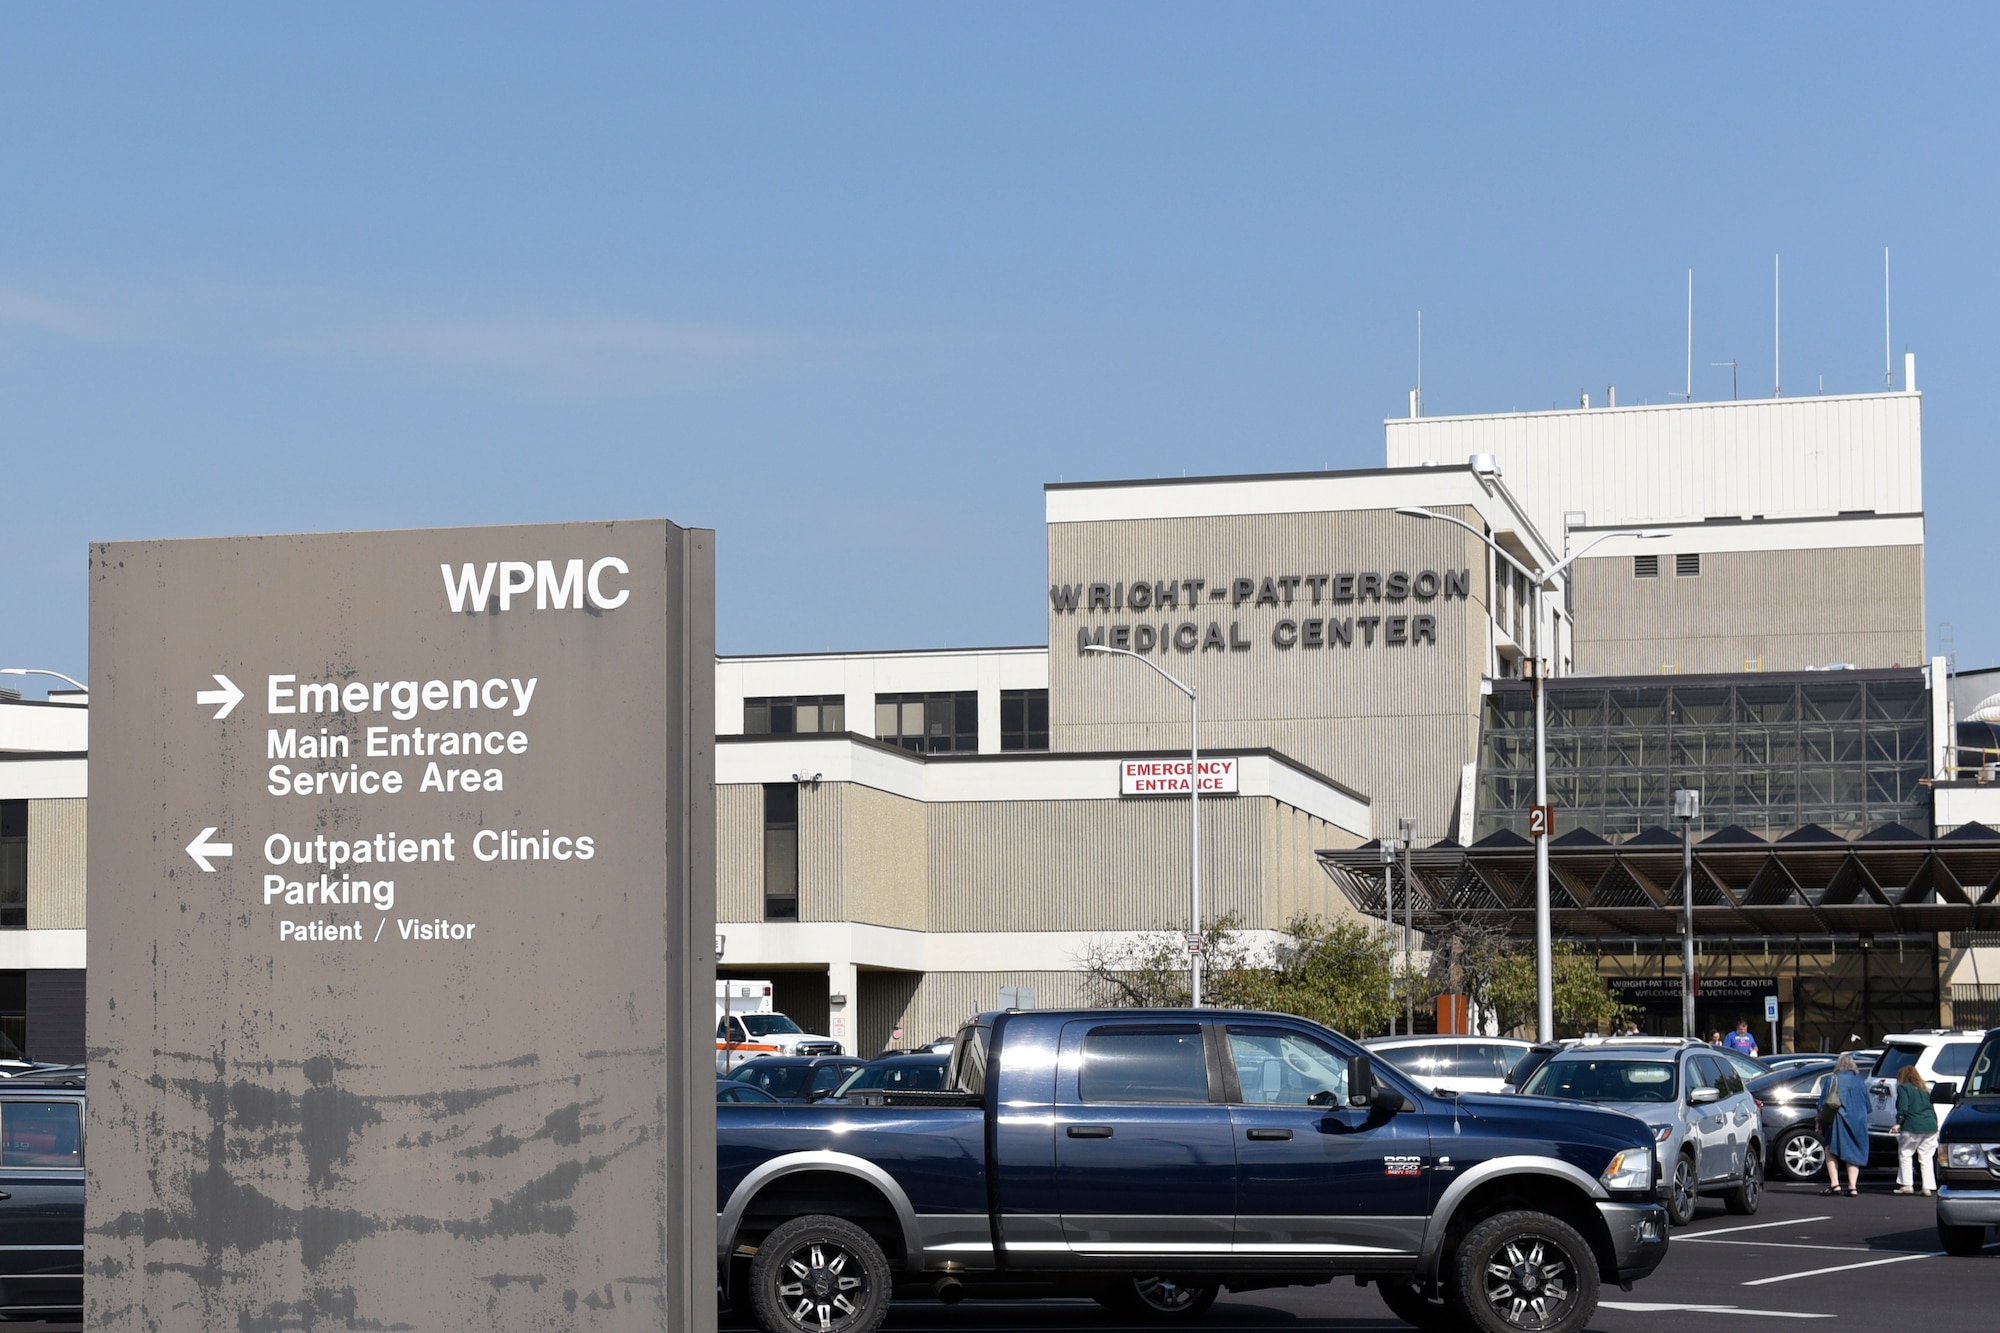 Wright-Patterson Medical Center at Wright-Patterson Air Force Base, Ohio, Sept. 21, 2019. (U.S. Air Force Photo by Ty Greenlees)